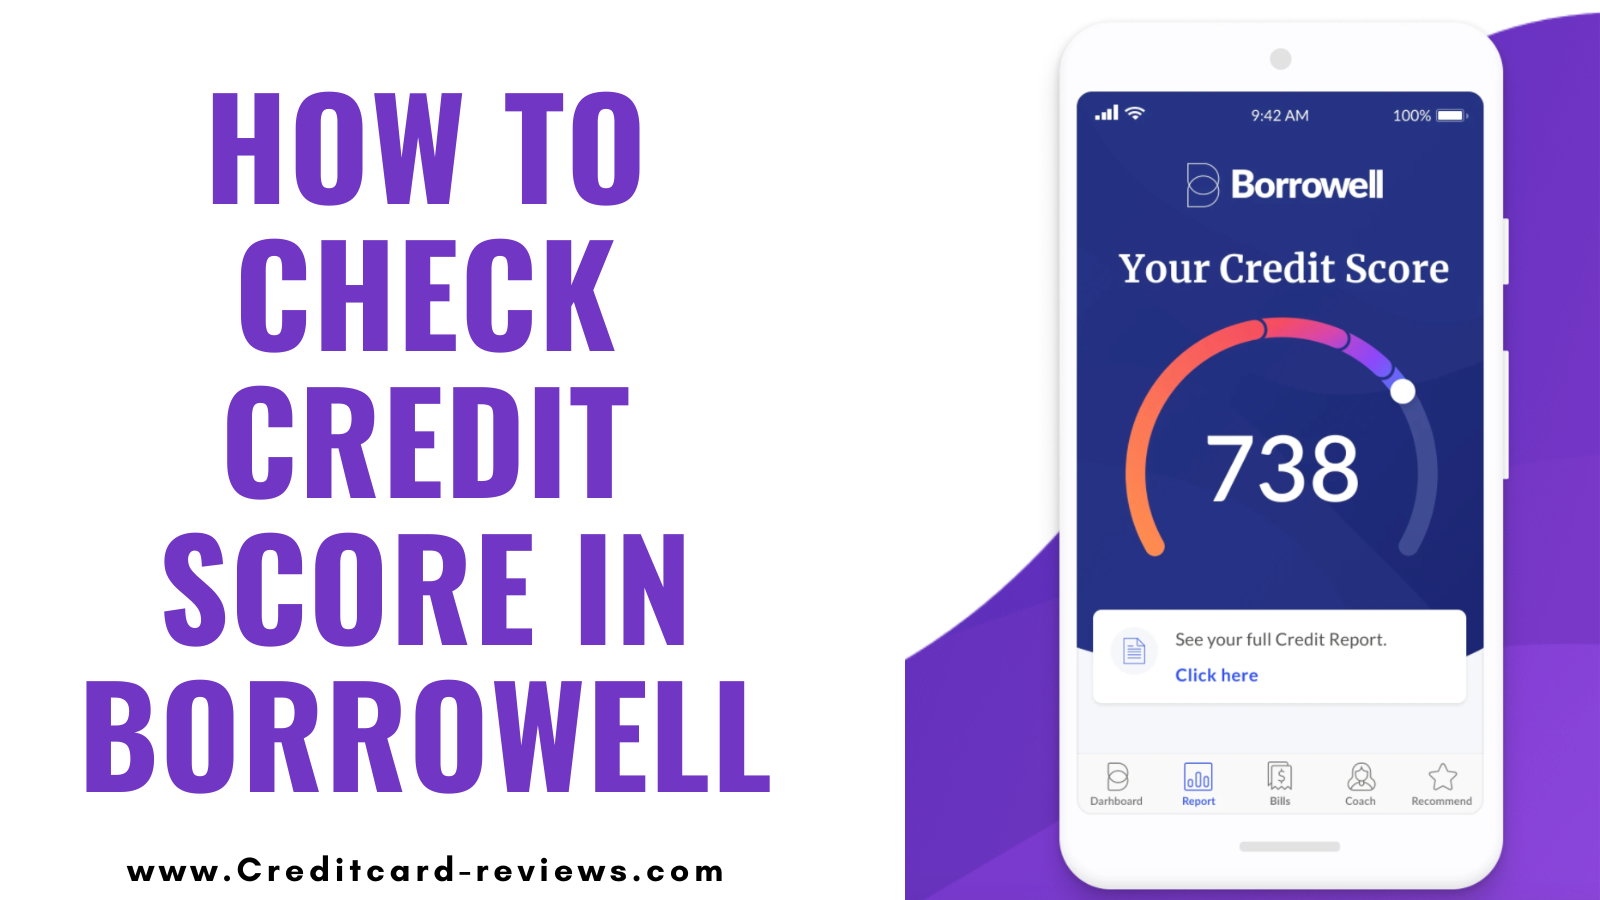 How to check Credit Score in Borrowell